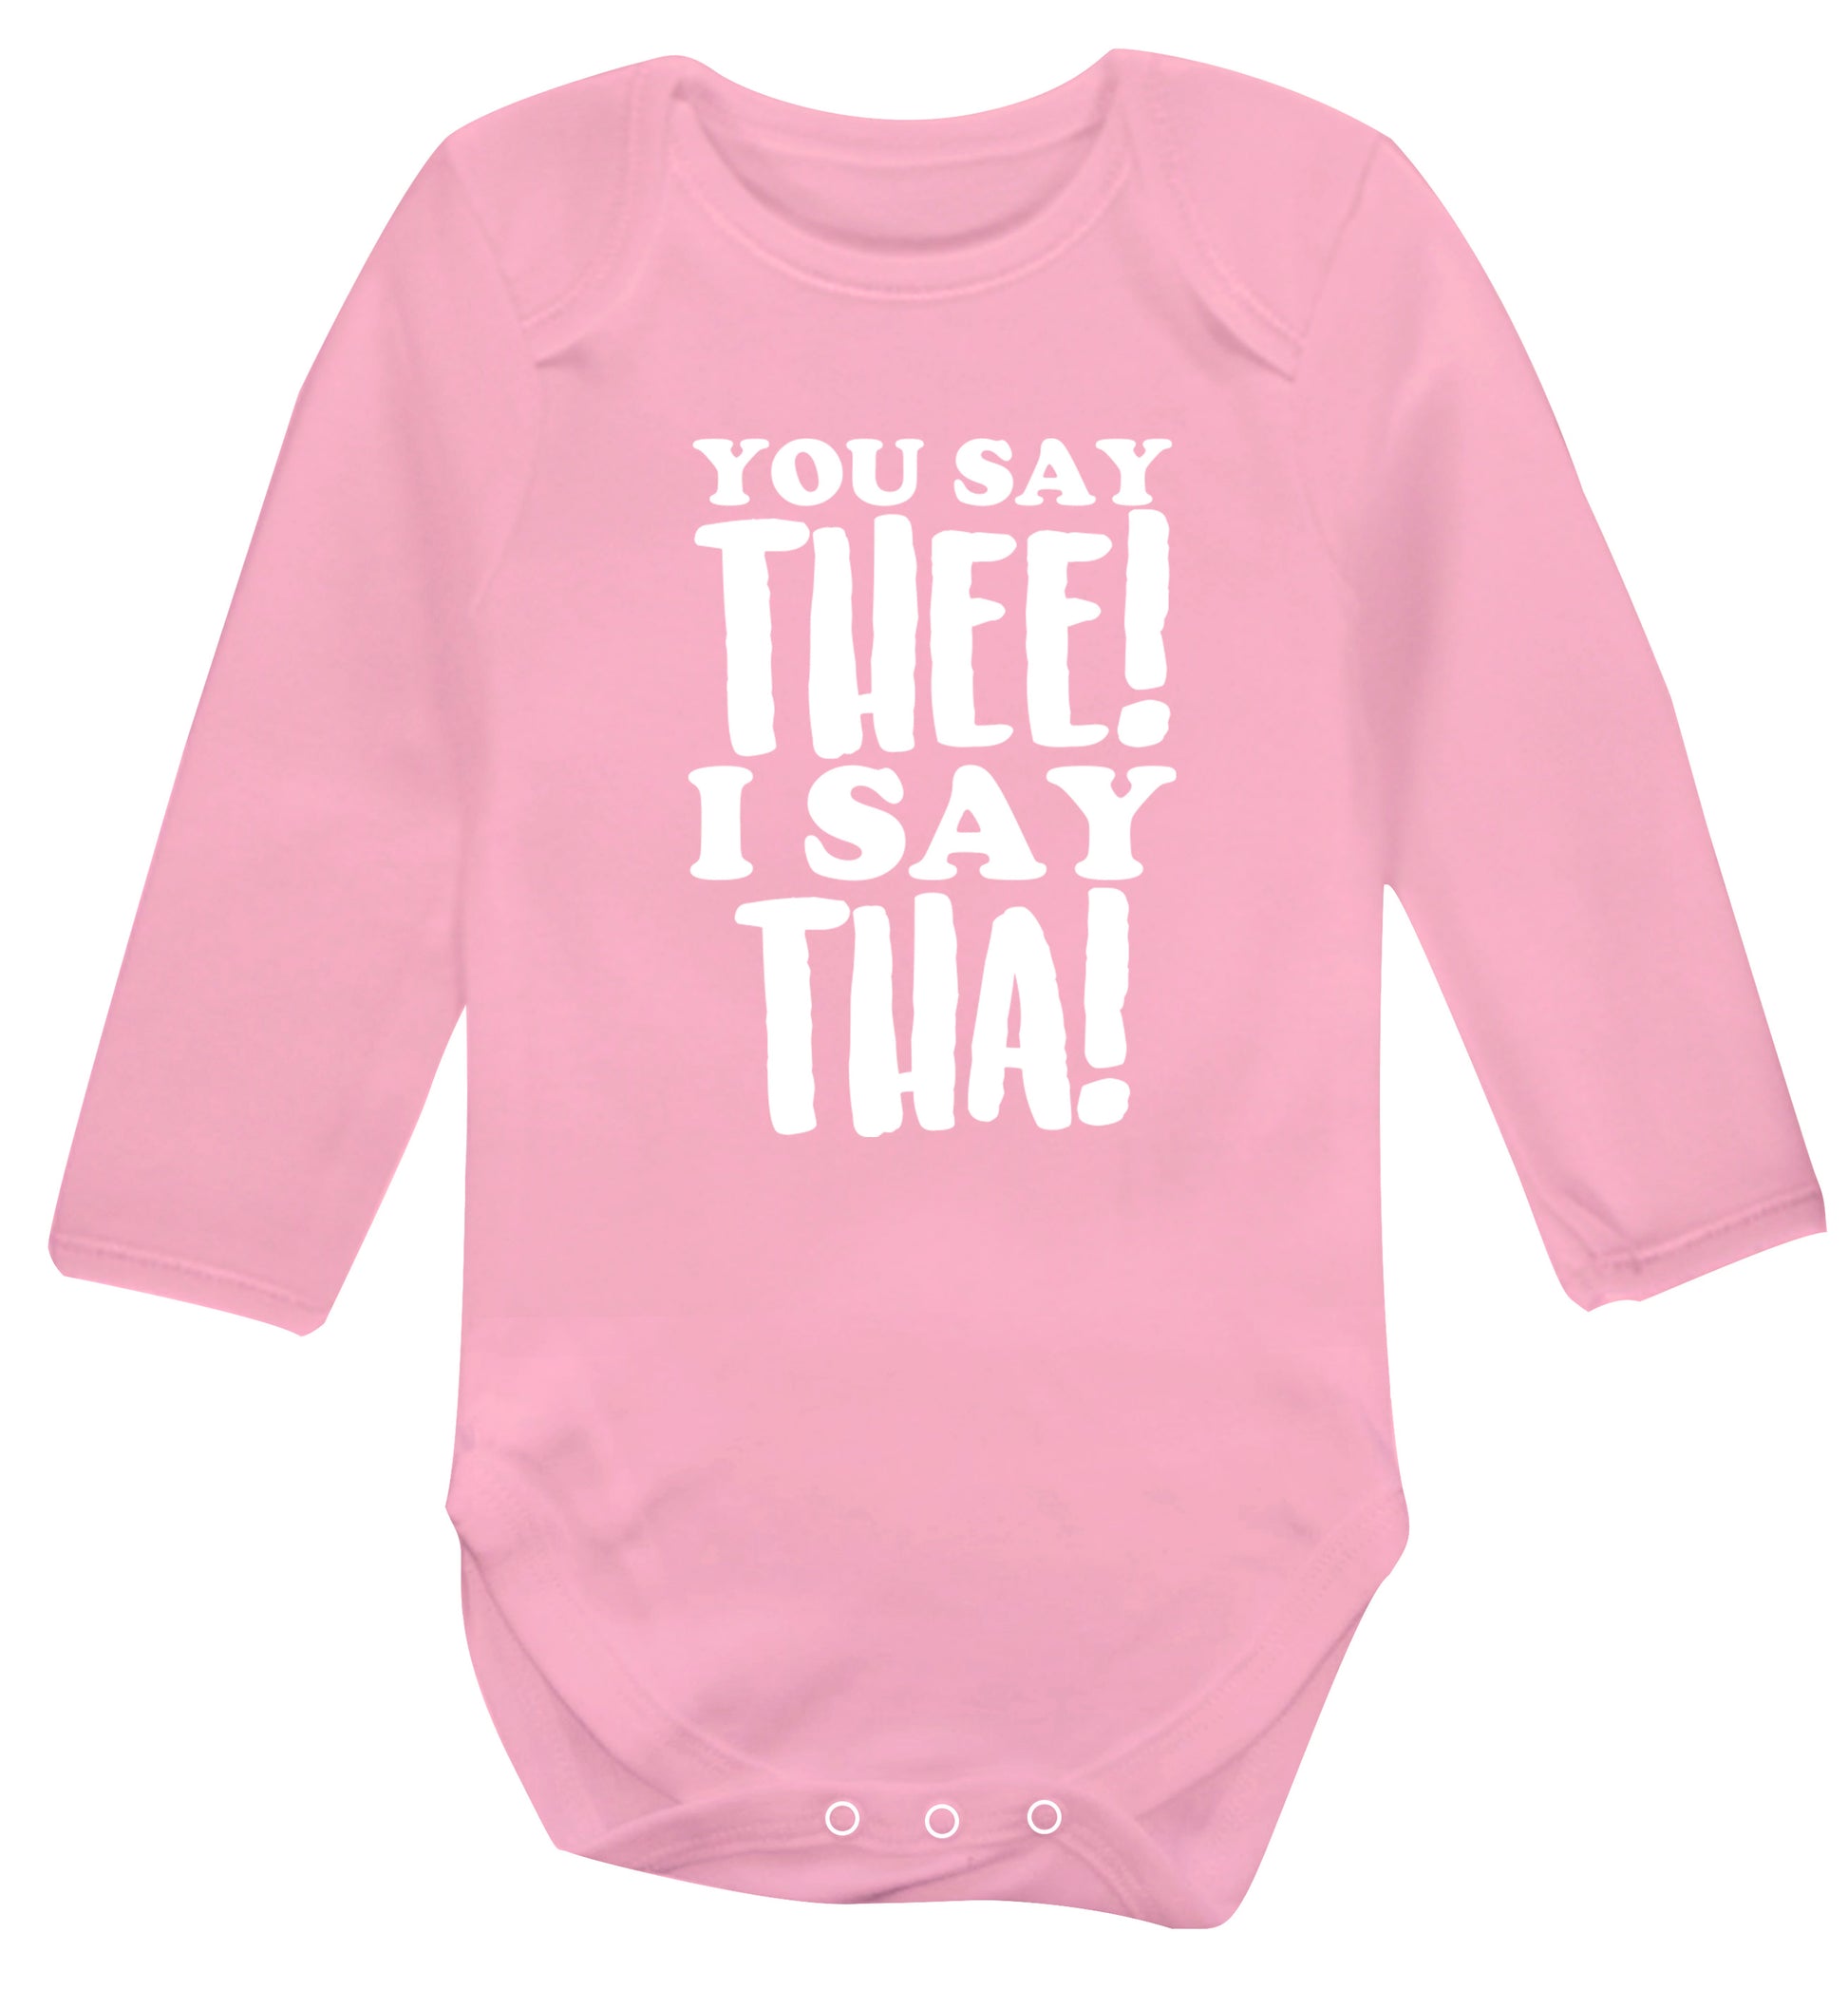 You say thee I say tha Baby Vest long sleeved pale pink 6-12 months